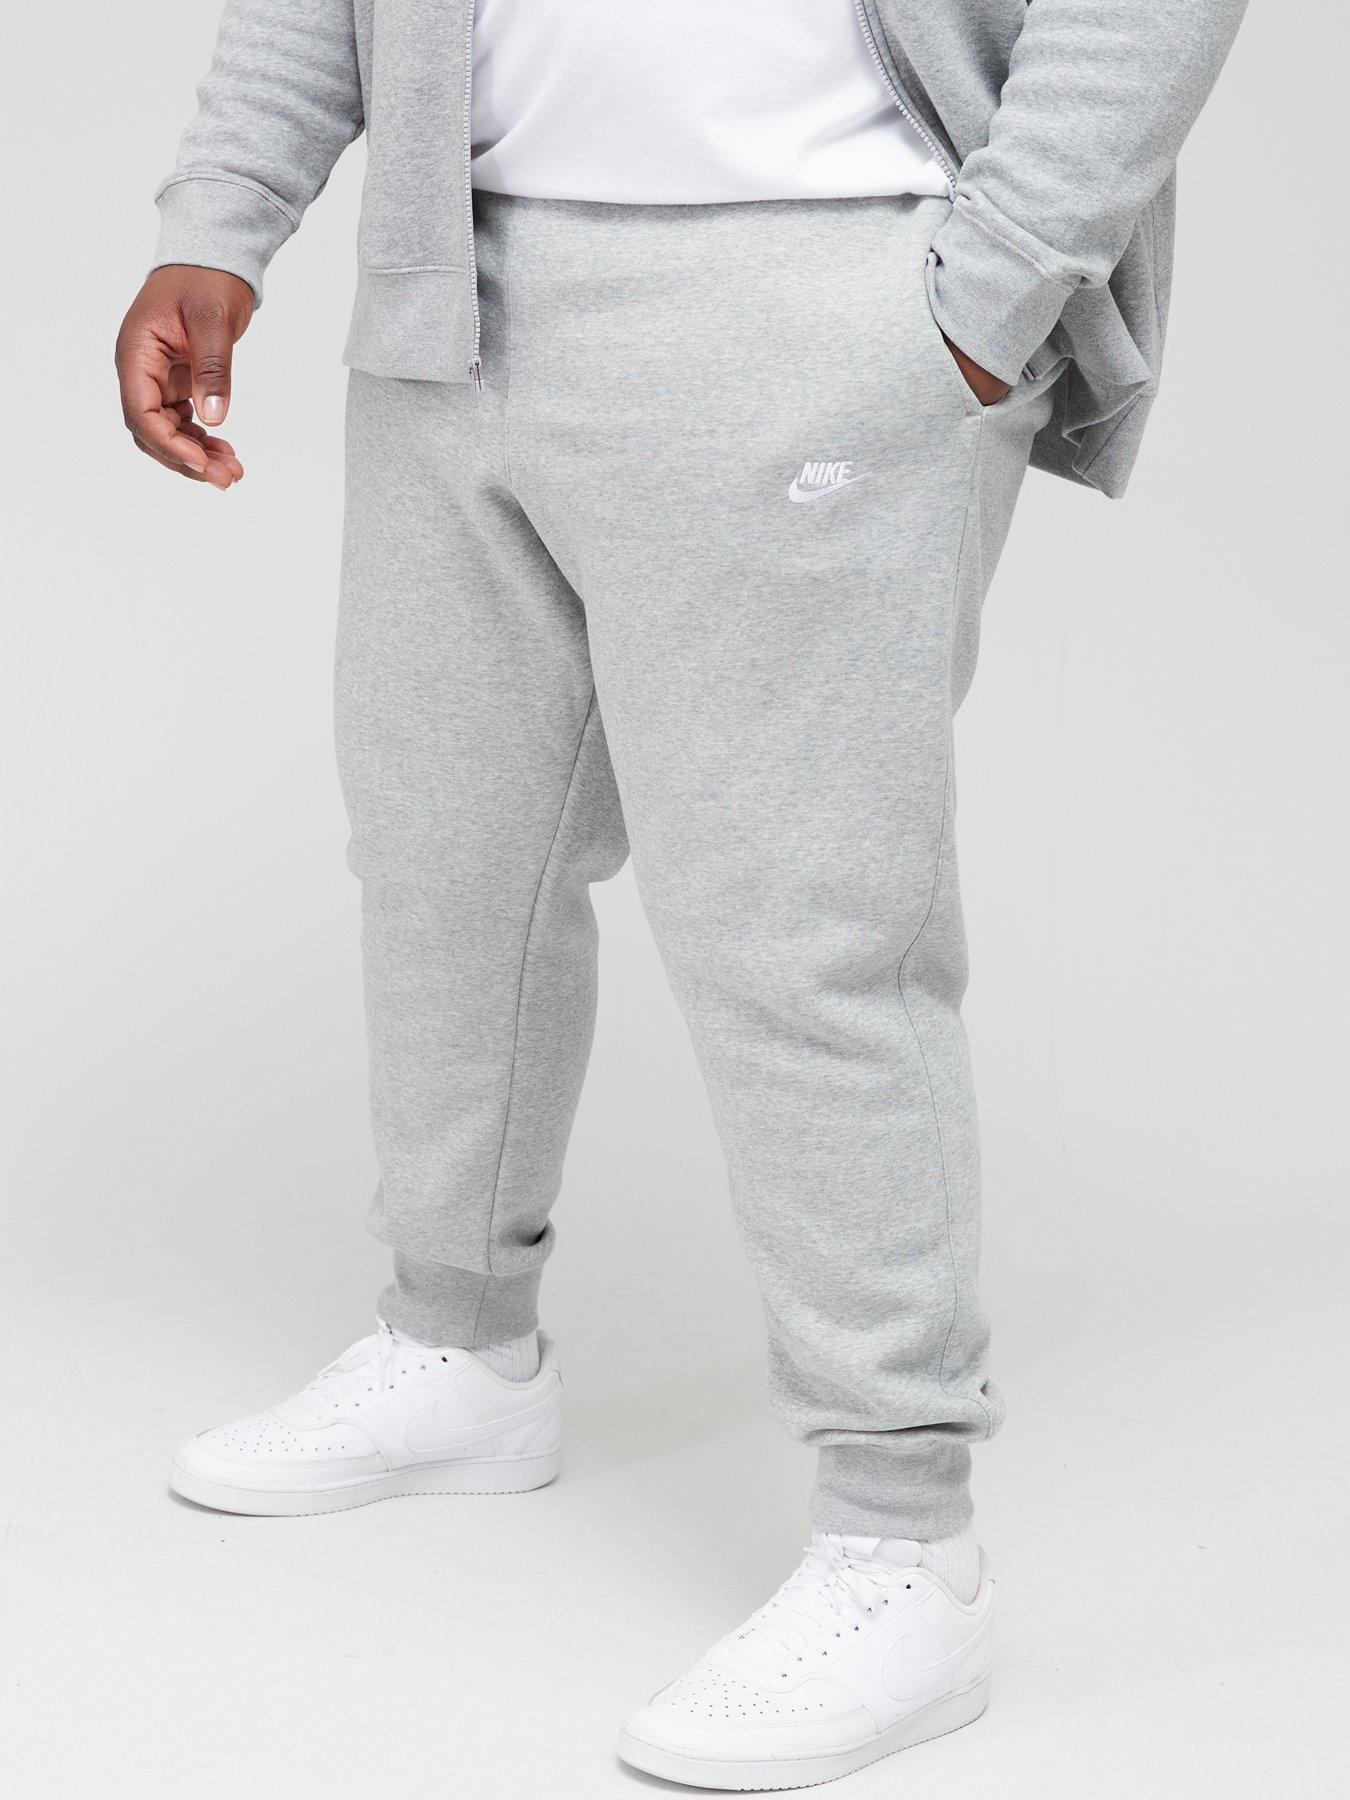 Details about  / New Mens Club Room Classic Joggers Sweatpants Casual £42 XL 2XL Tracksuit Bottom